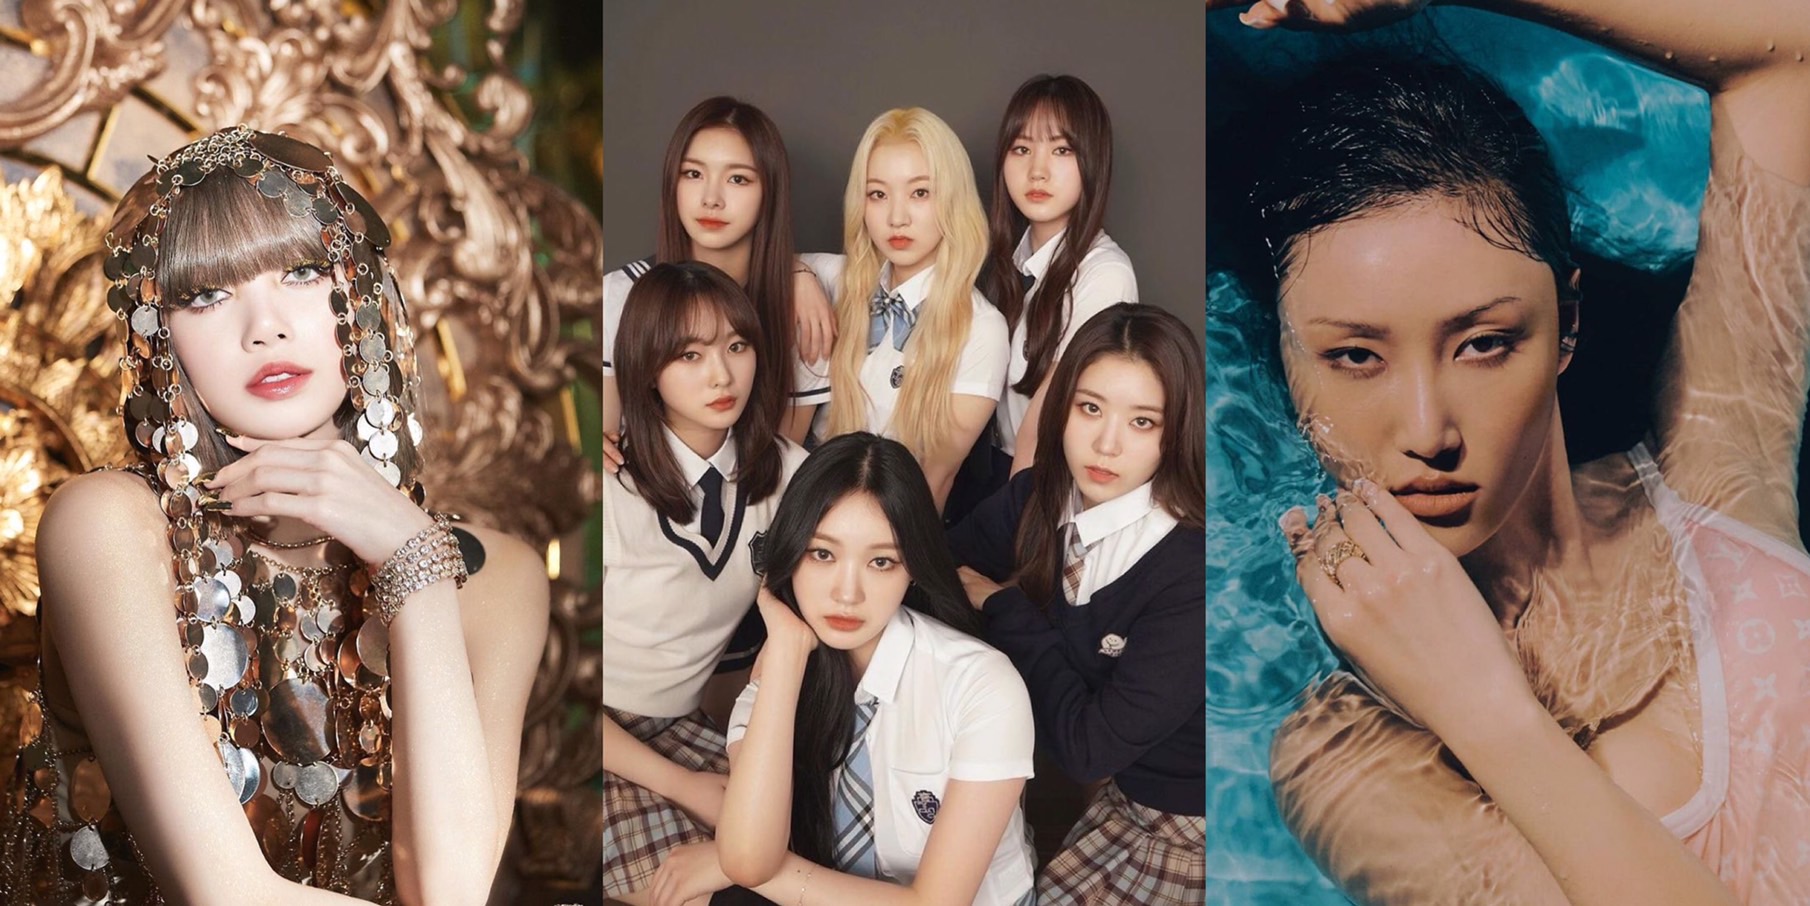 Not Only Lisa, These 5 Korean Idols Also Use Their Names as Song Titles!